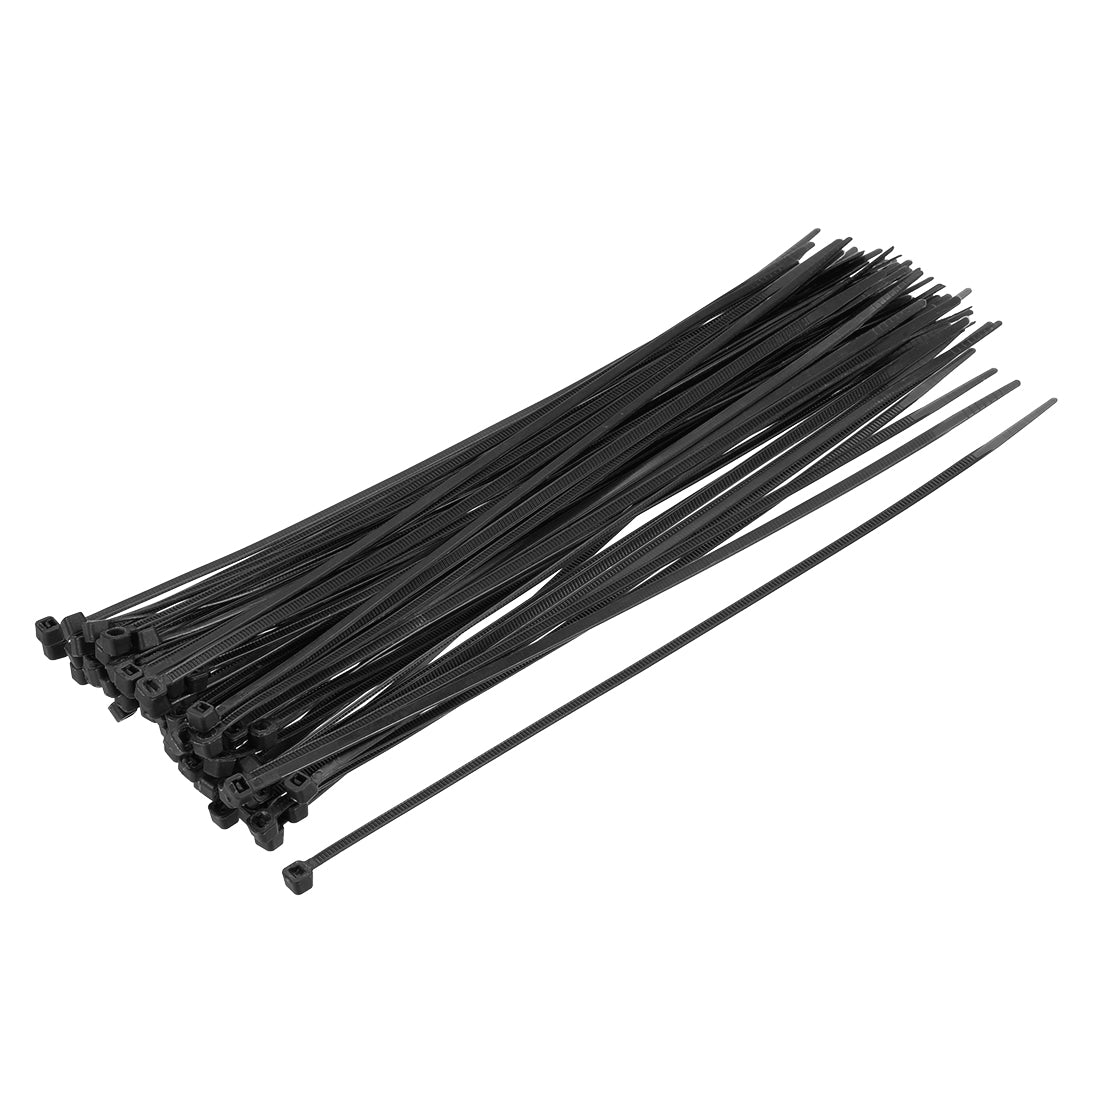 uxcell Uxcell Cable Zip Ties 300mmx2.7mm Self-Locking Nylon Tie Wraps Black 40pcs